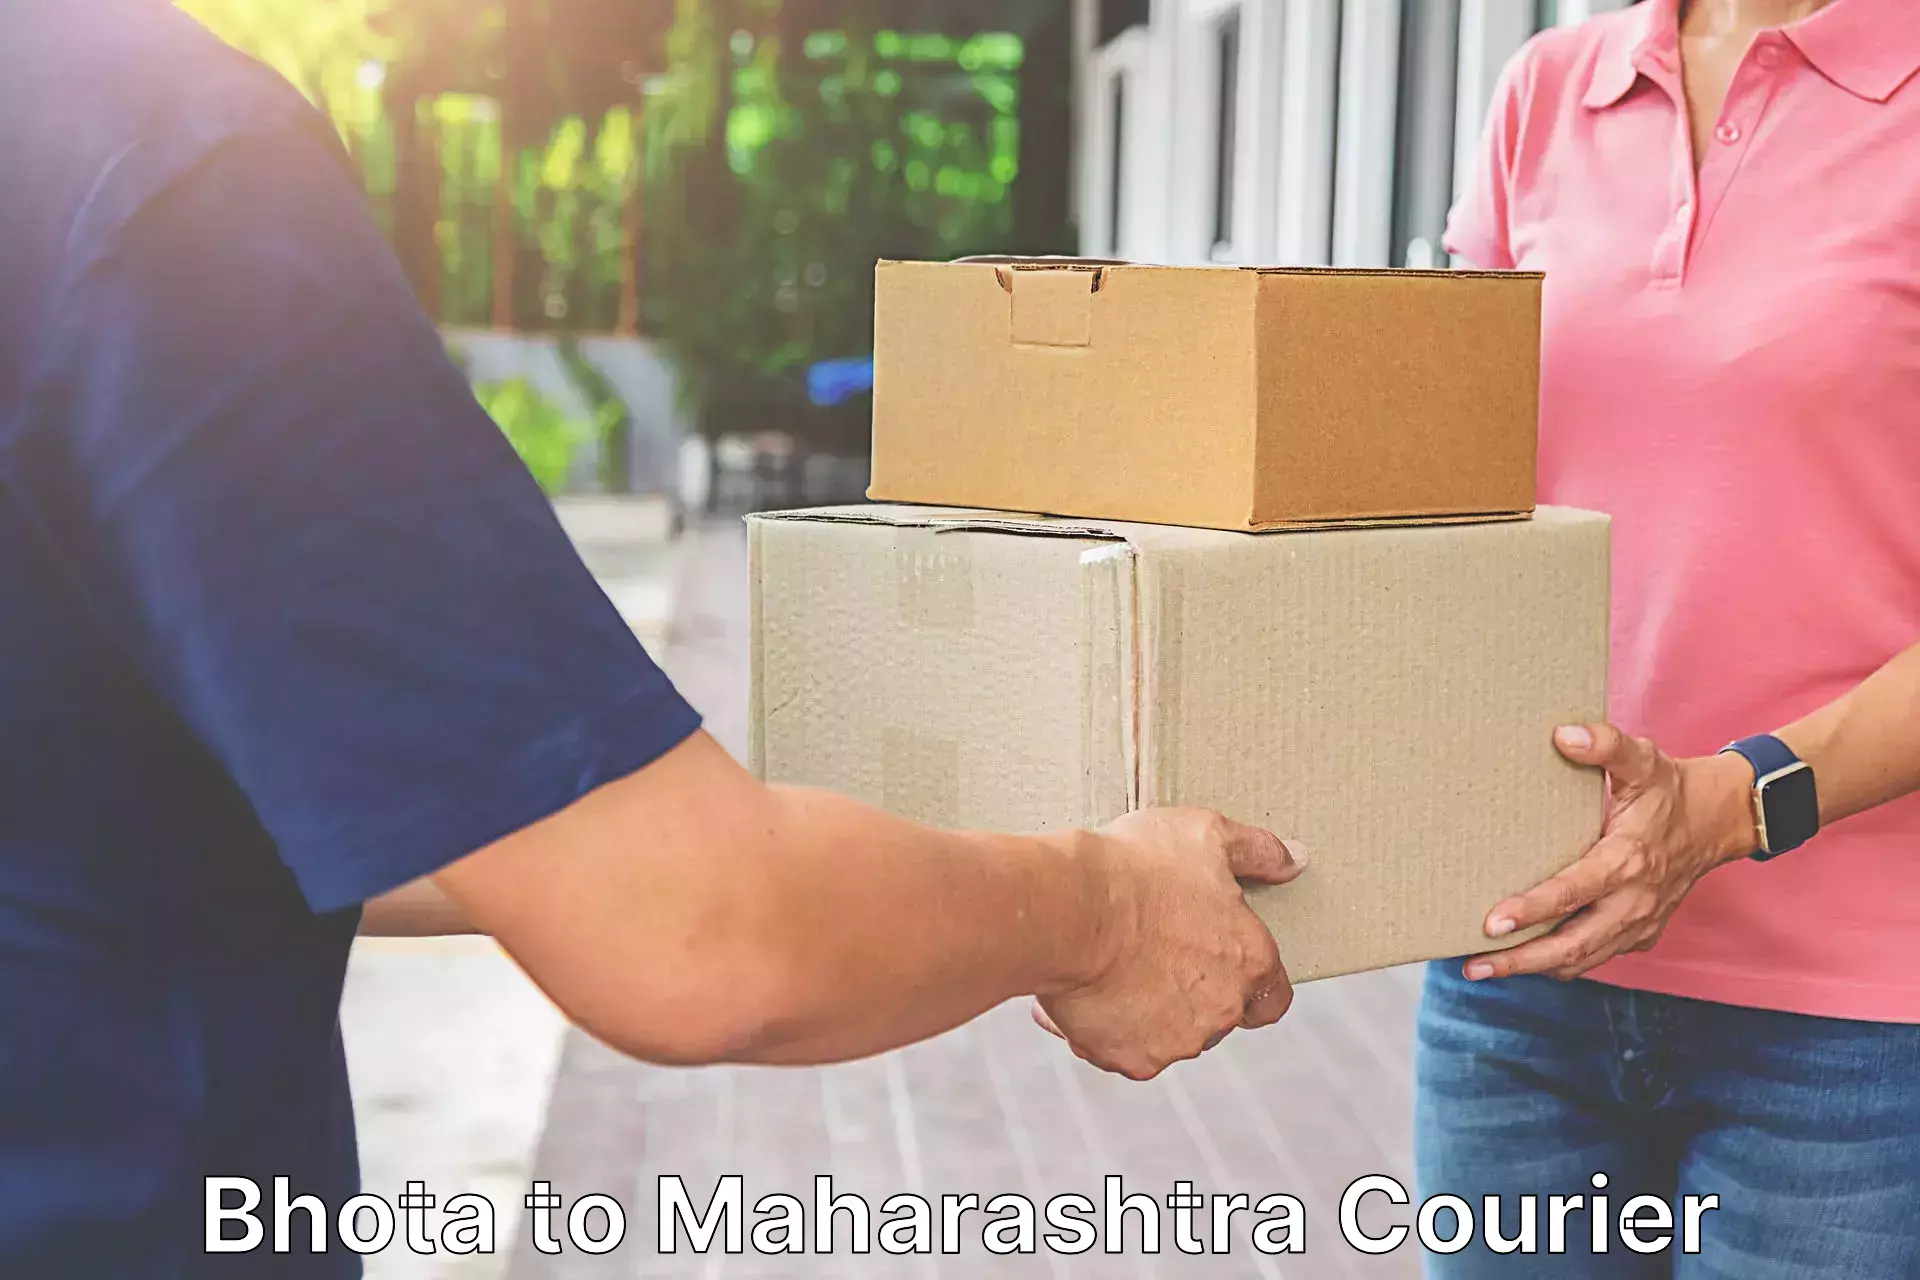 Pharmaceutical courier Bhota to Jath